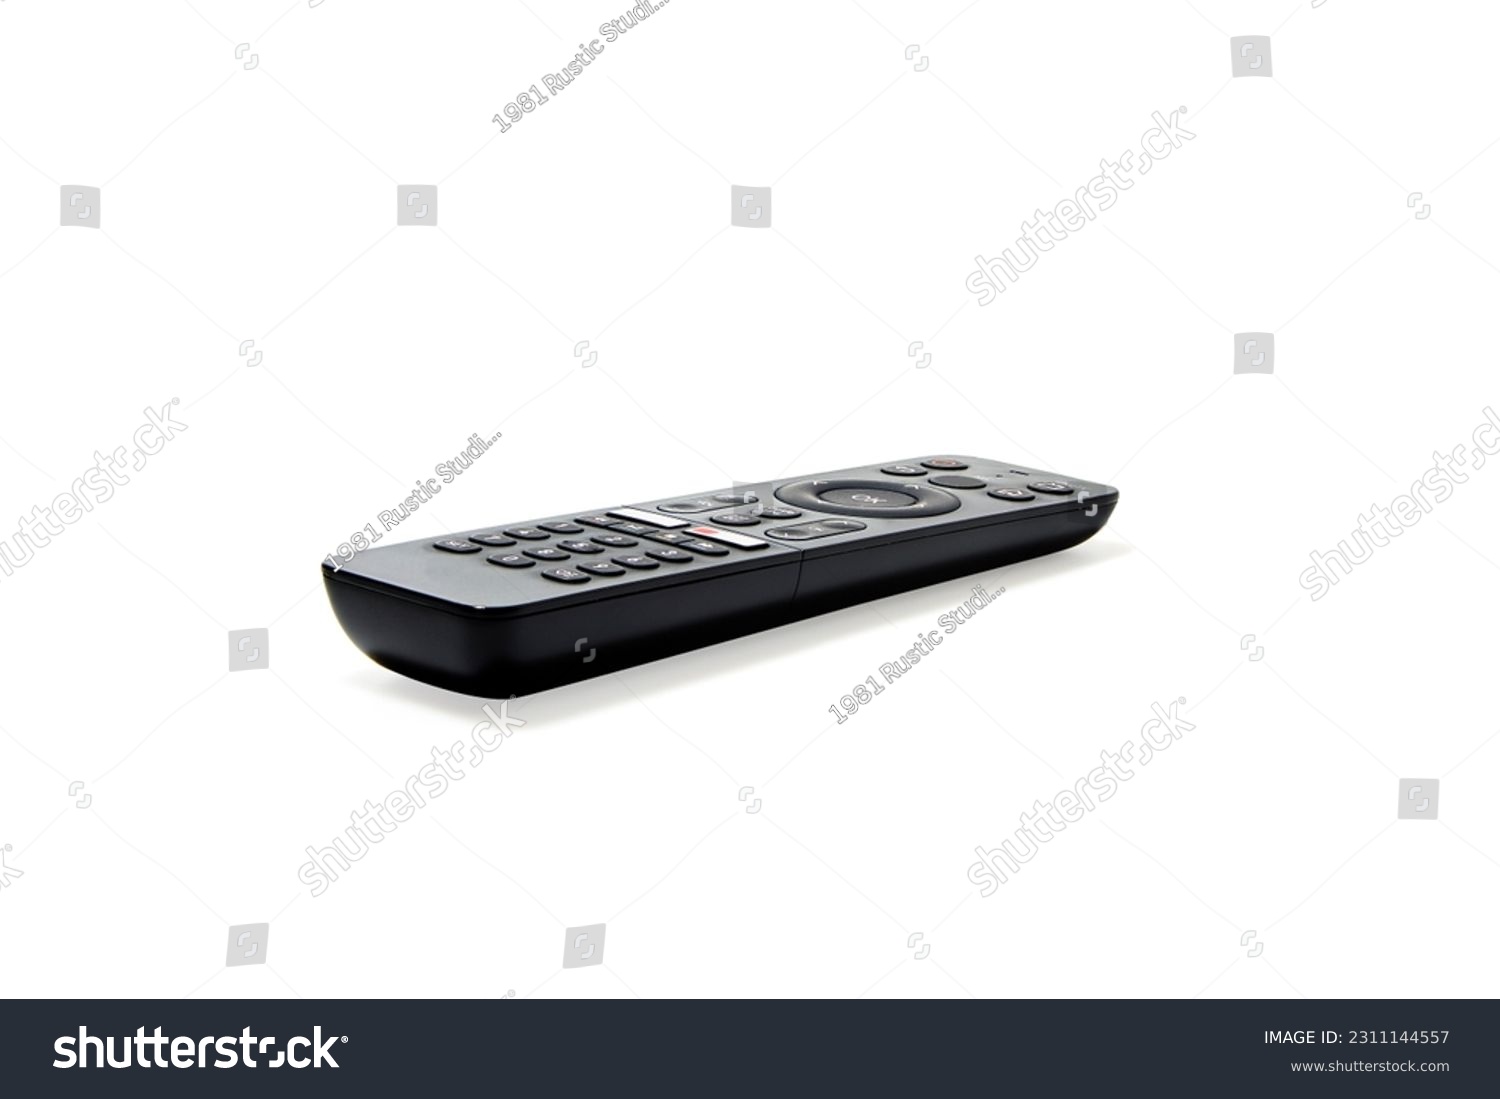 Perspective view of television and audio remote control isolated on white background #2311144557